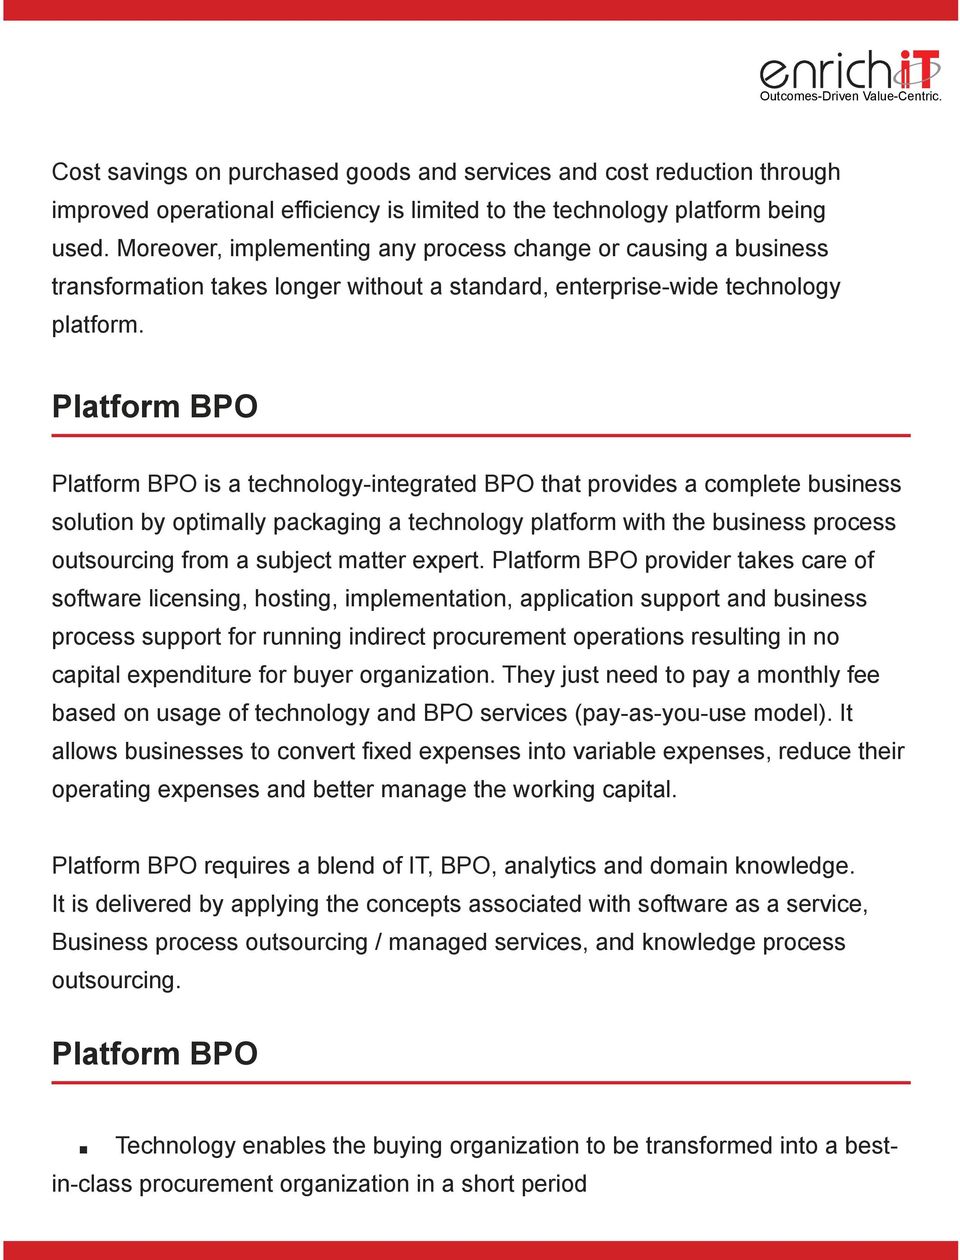 provides a complete business solution by optimally packaging a technology platform with the business process outsourcing from a subject matter expert Platform BPO provider takes care of software